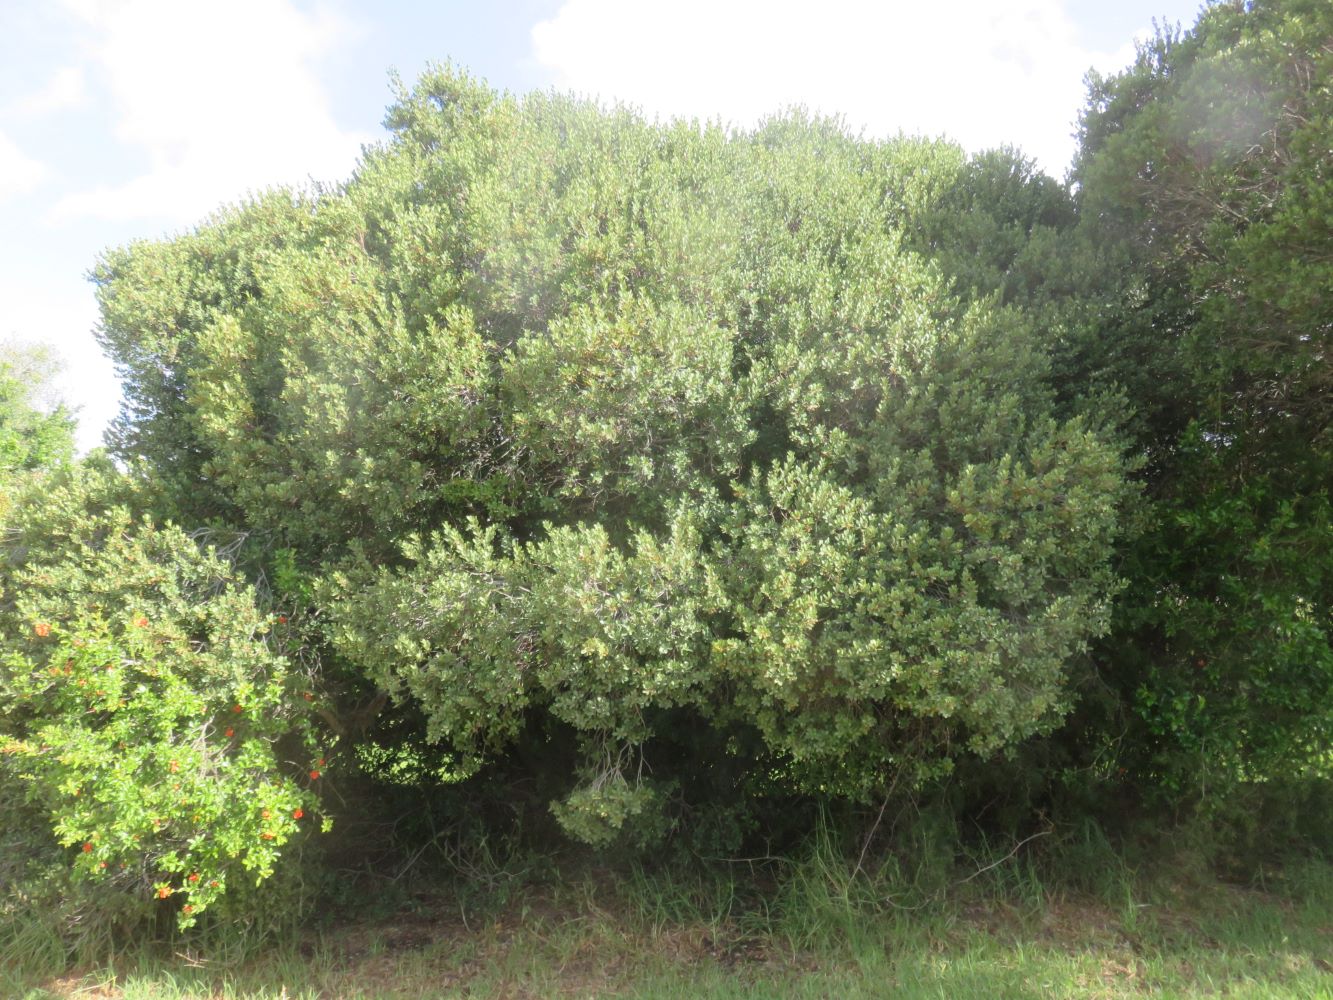 Euclea racemosa growing full sun. It is growing along a seasonal stream. The soil is sandy with clay banks nearby on the southern slopes of the Tygerberg, Cape Province.